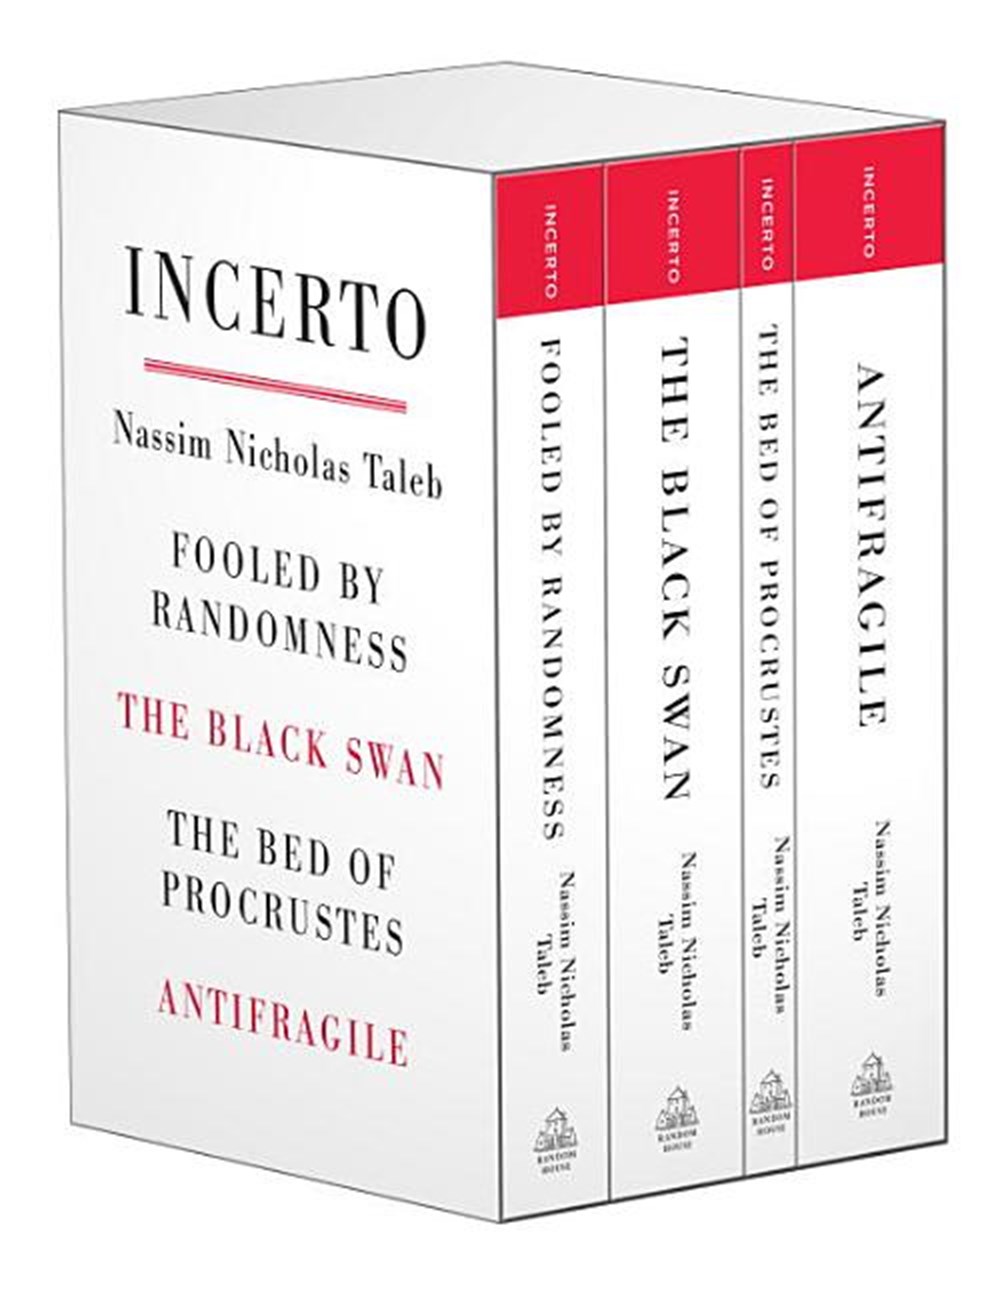 Incerto (Deluxe Edition) Fooled by Randomness, the Black Swan, the Bed of Procrustes, Antifragile, S